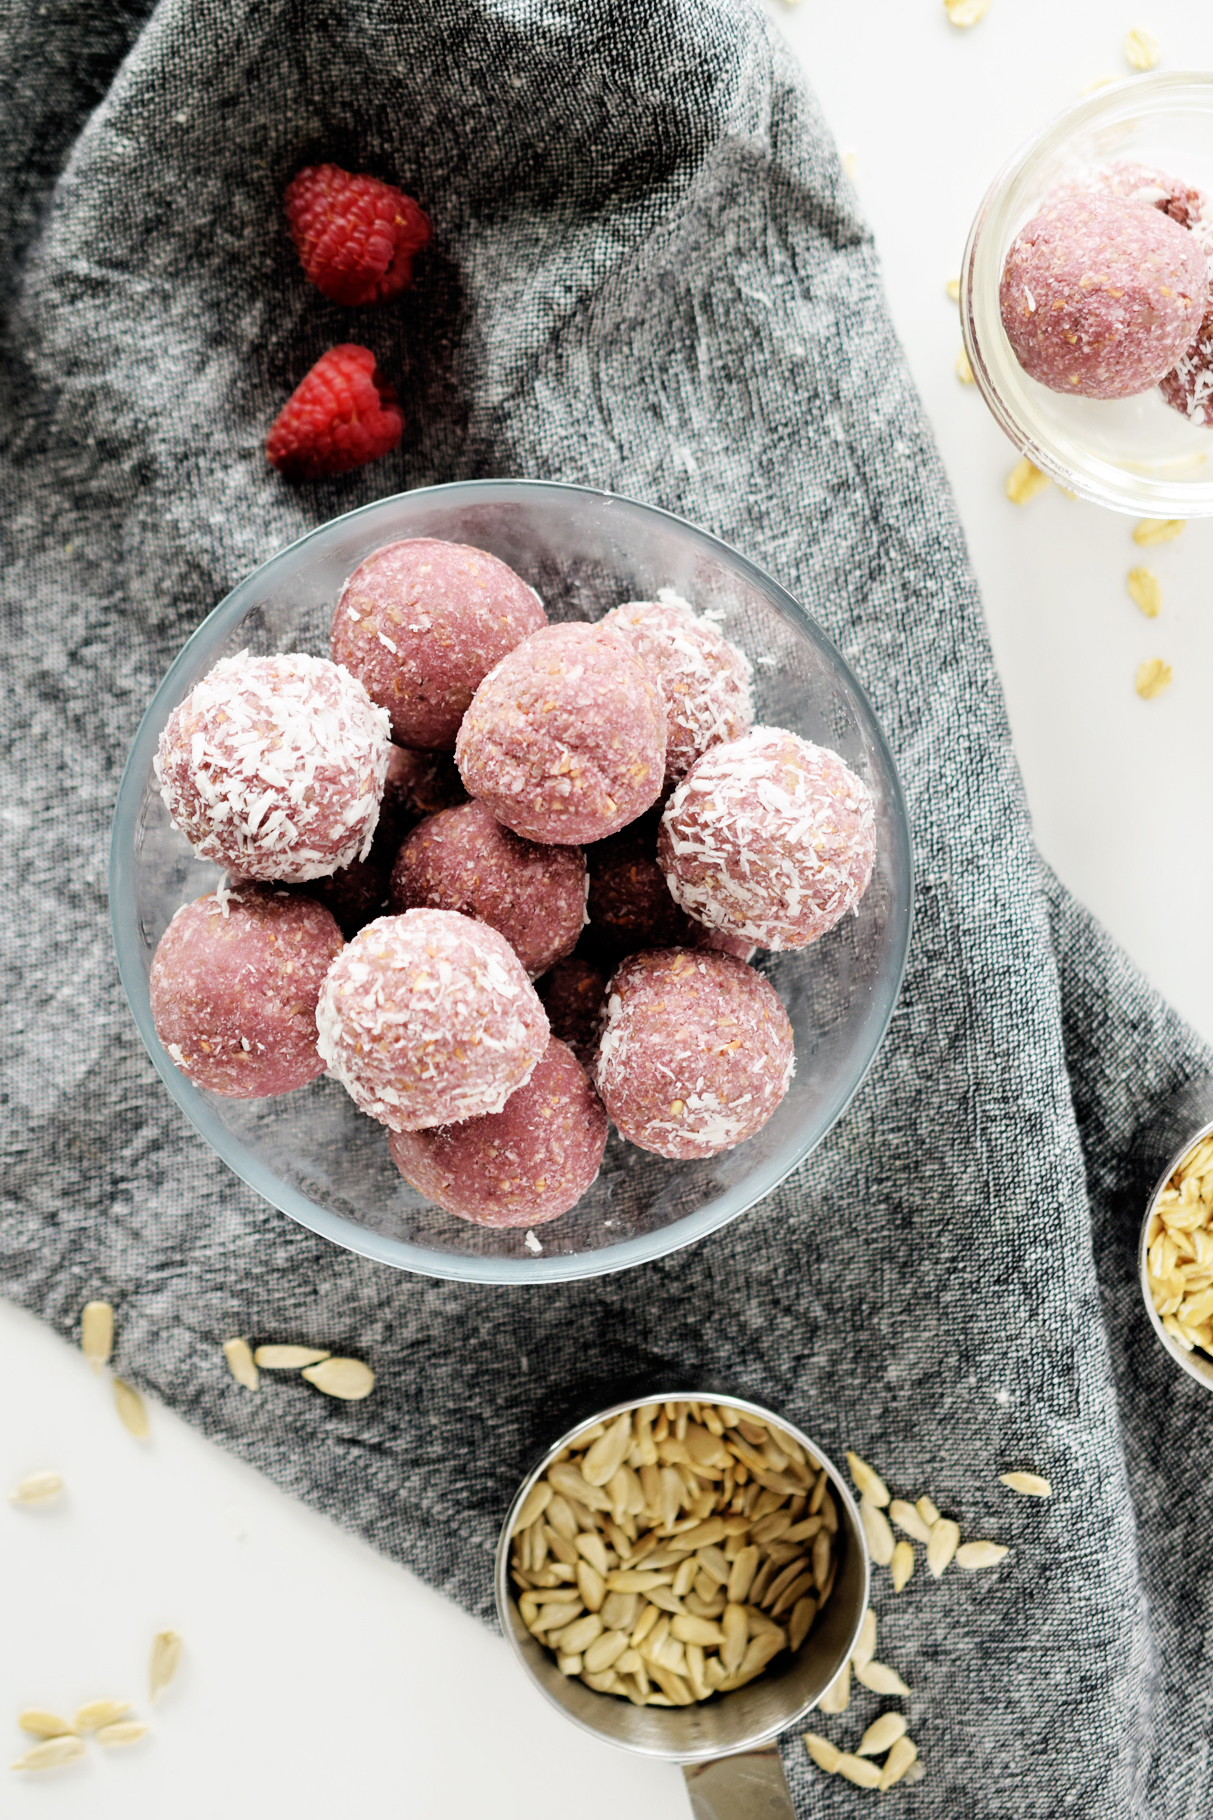 raspberry coconut energy balls in glass bowl with grey napkin and pumpkin seeds sprinkled from a cup